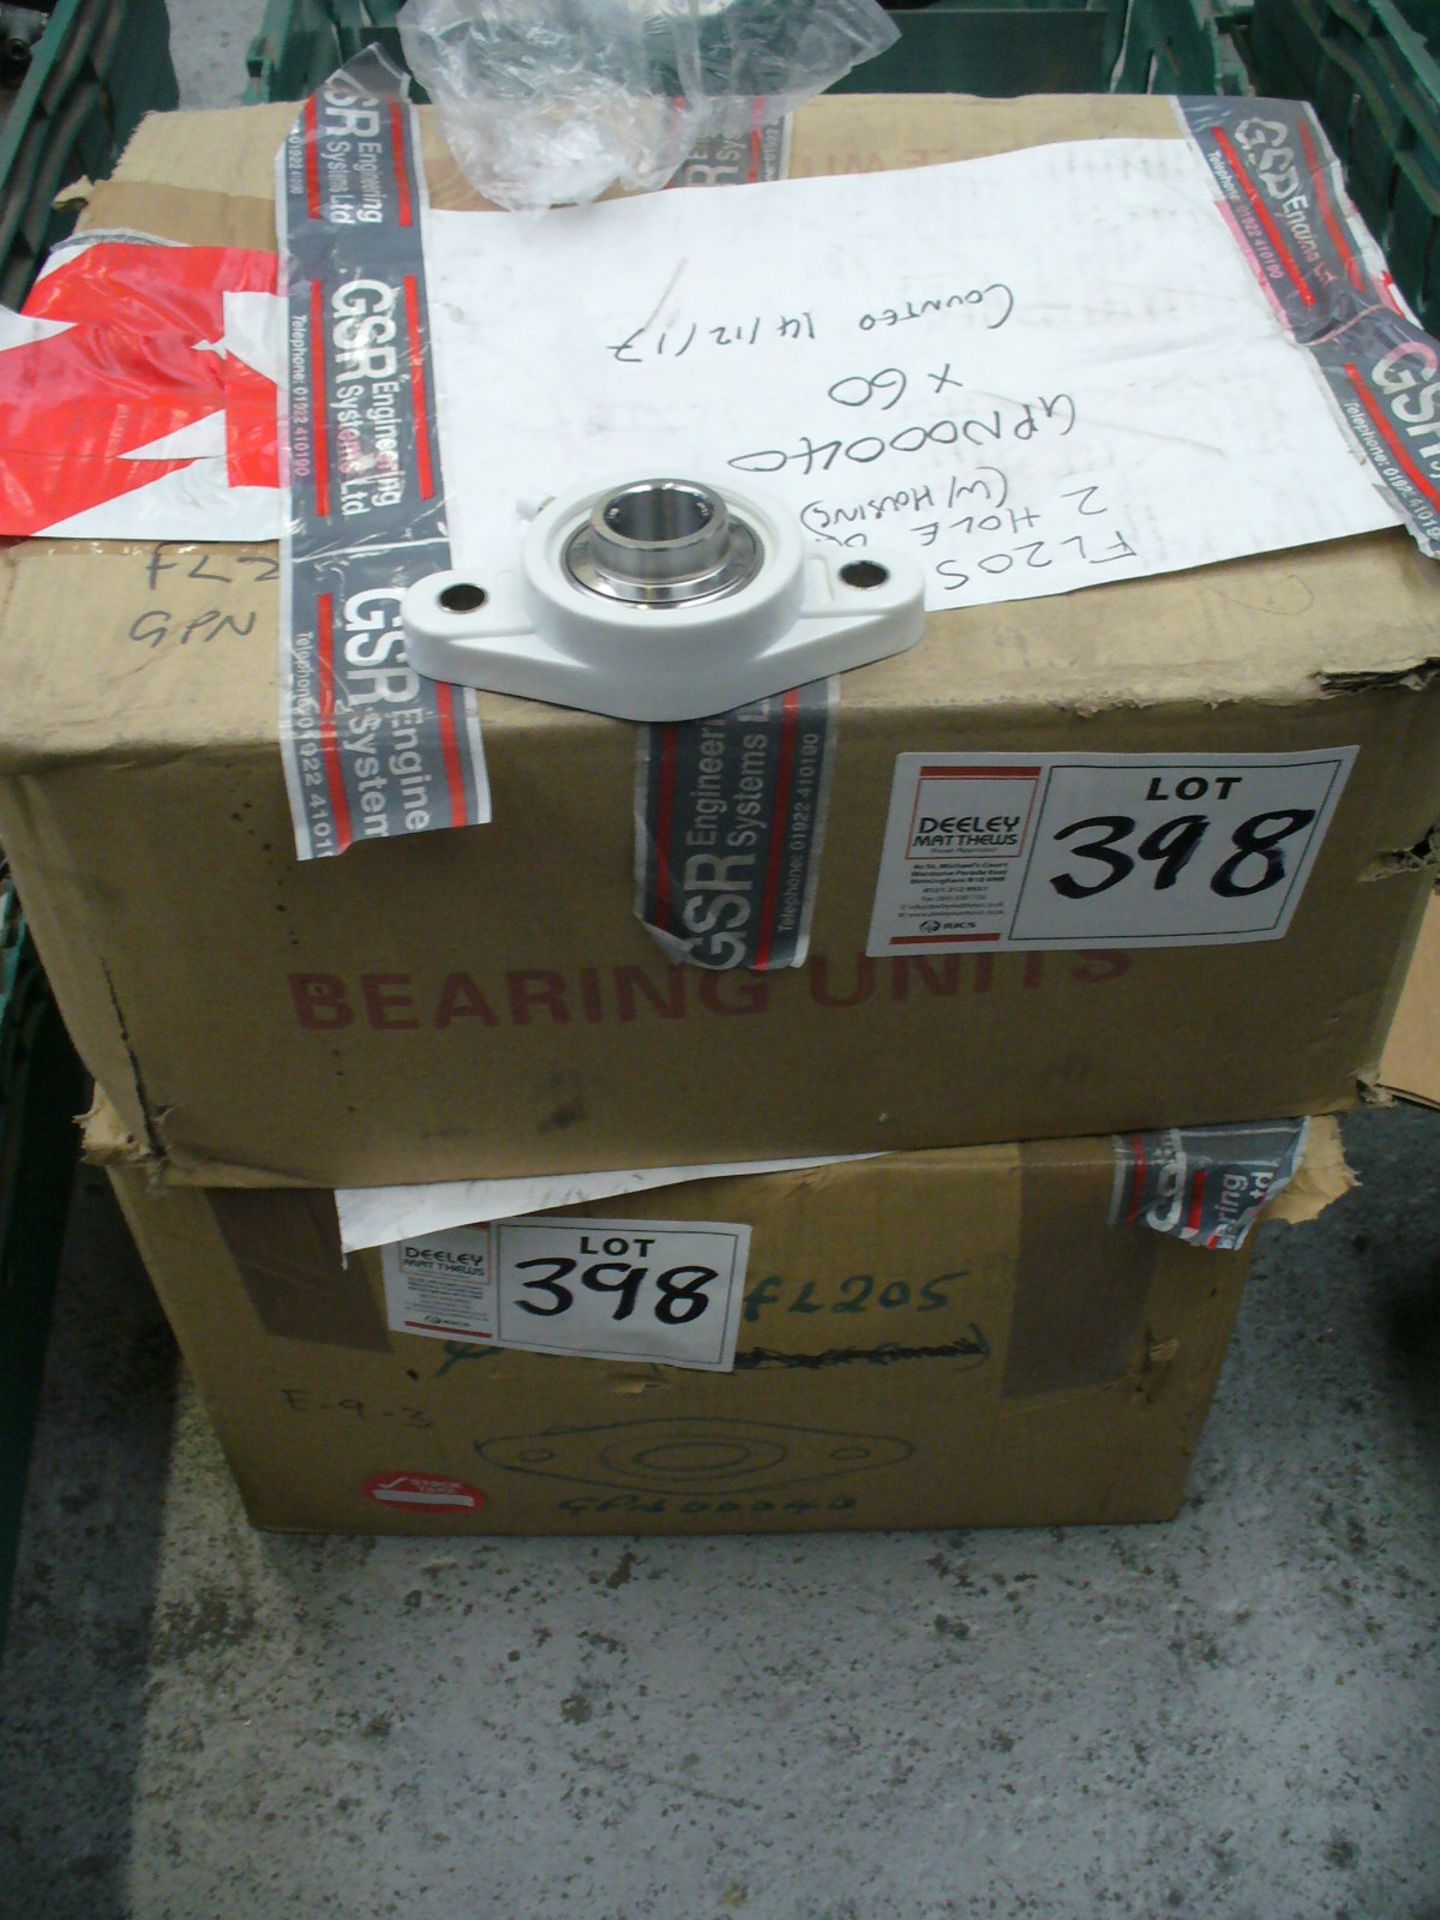 2 BINS and 2 BOXES - Quantity approx 120 total, 2 hole bearing housings and 1 box of 4 hole - Image 3 of 3